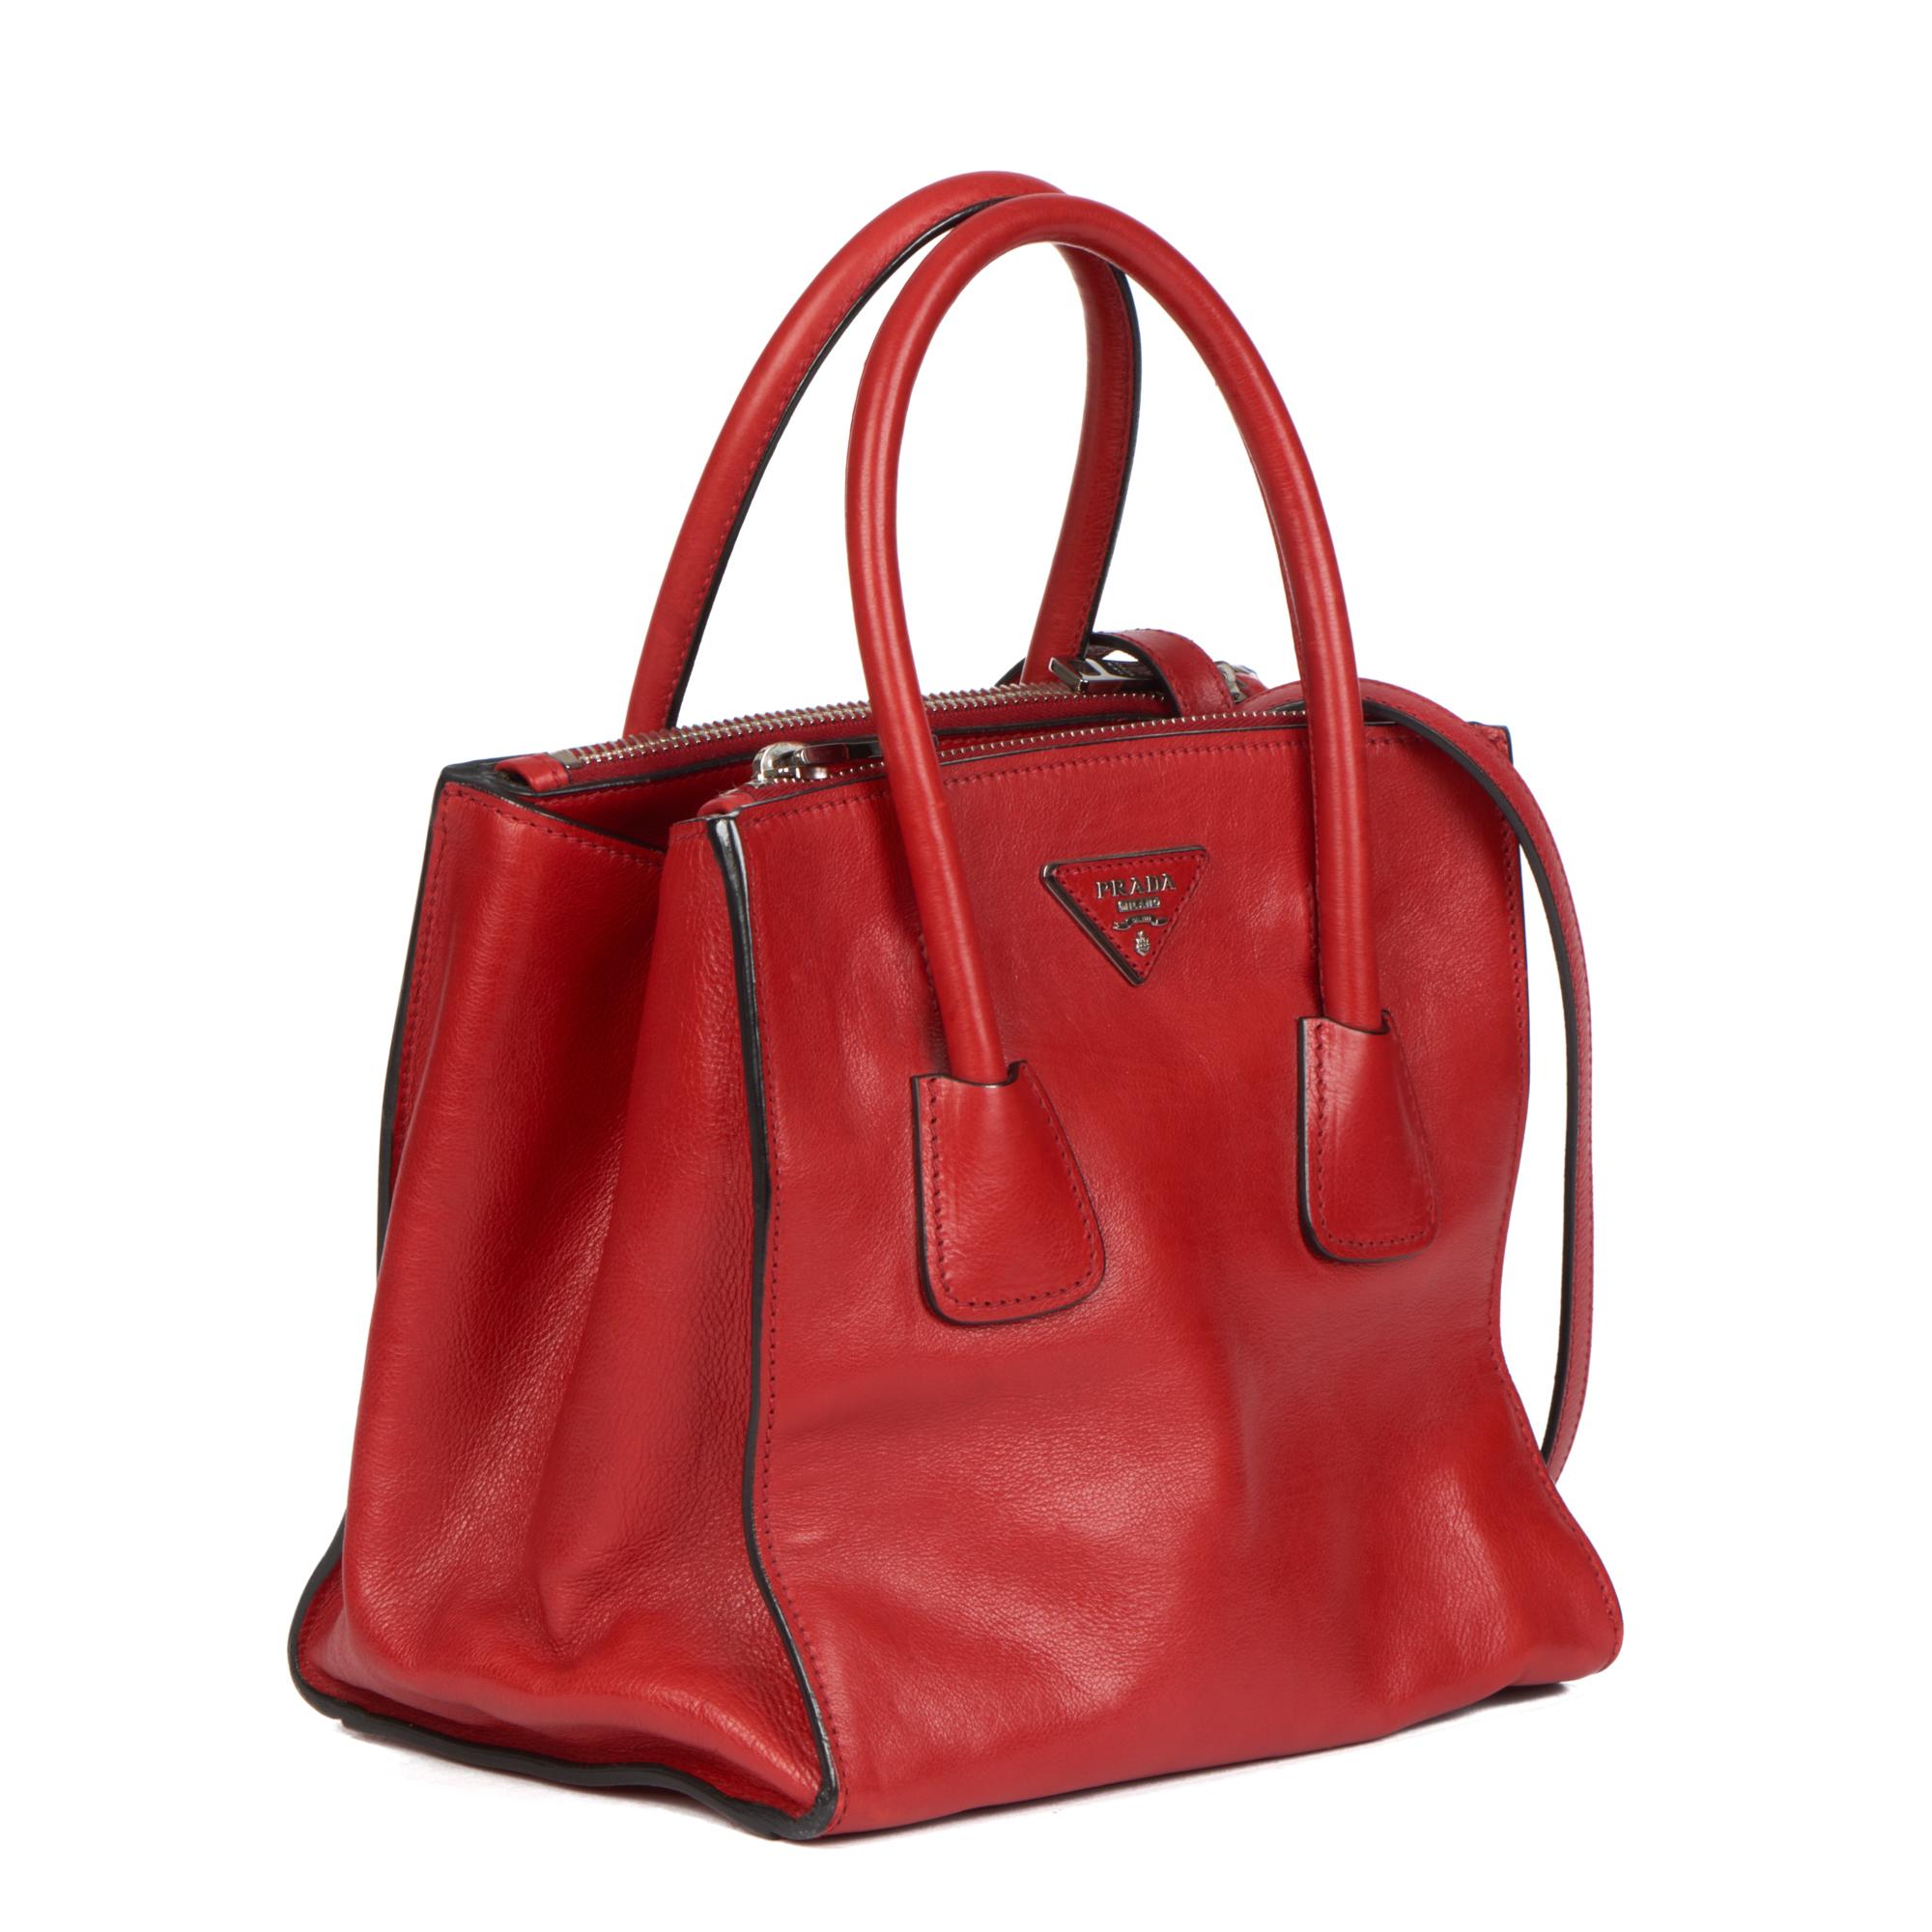 Prada FUOCO GLACE CALFSKIN LEATHER TWIN POCKET DOUBLE HANDLE TOTE

CONDITION NOTES
The exterior is in excellent condition with light signs of use.
The interior is in excellent condition with minimal signs of use.
The hardware is in excellent